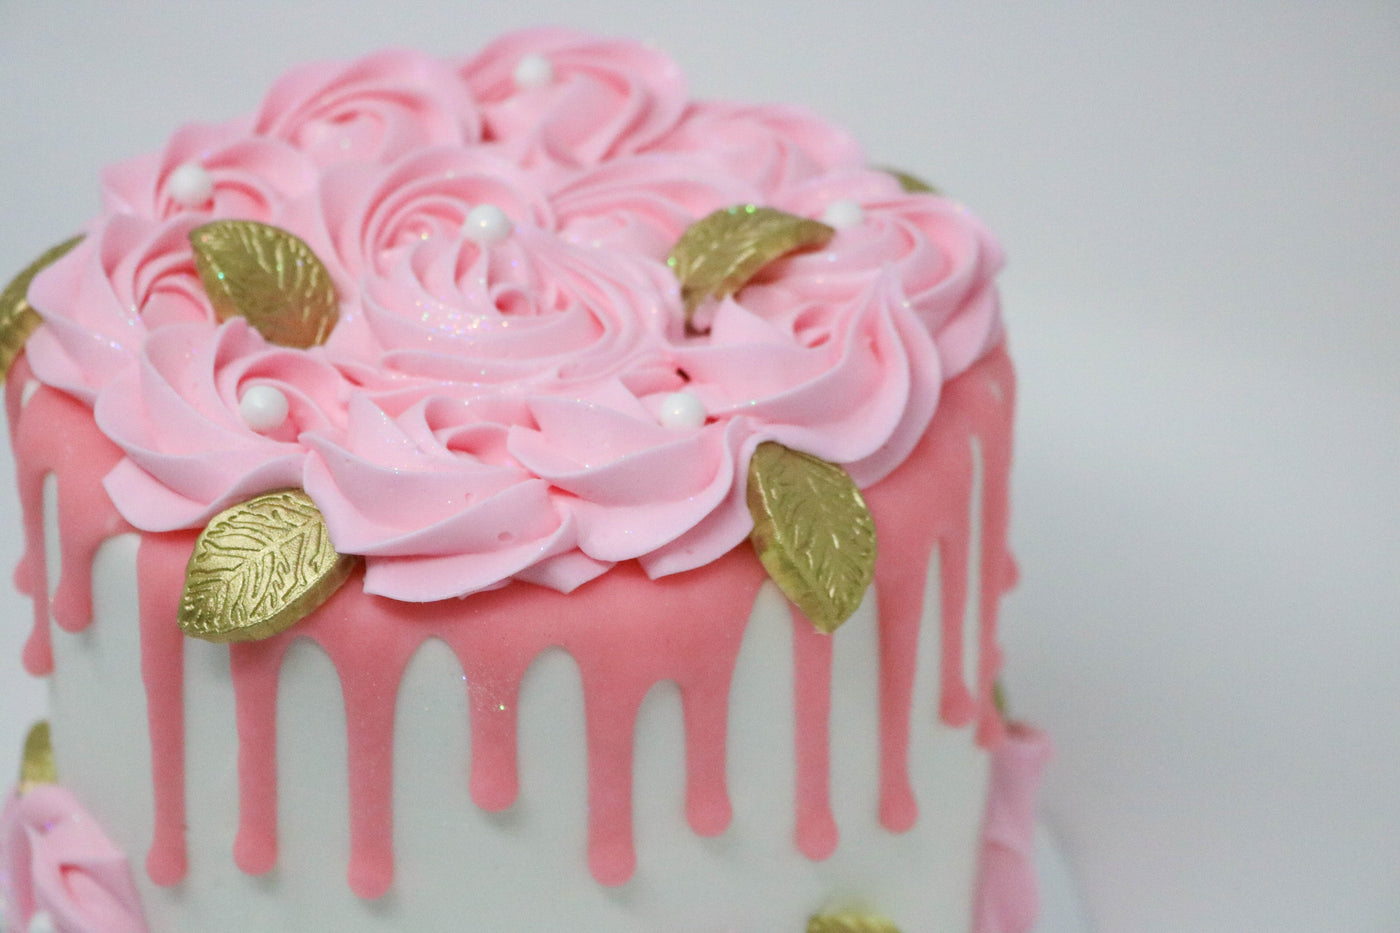 Girly cake with gold details (Same Day)